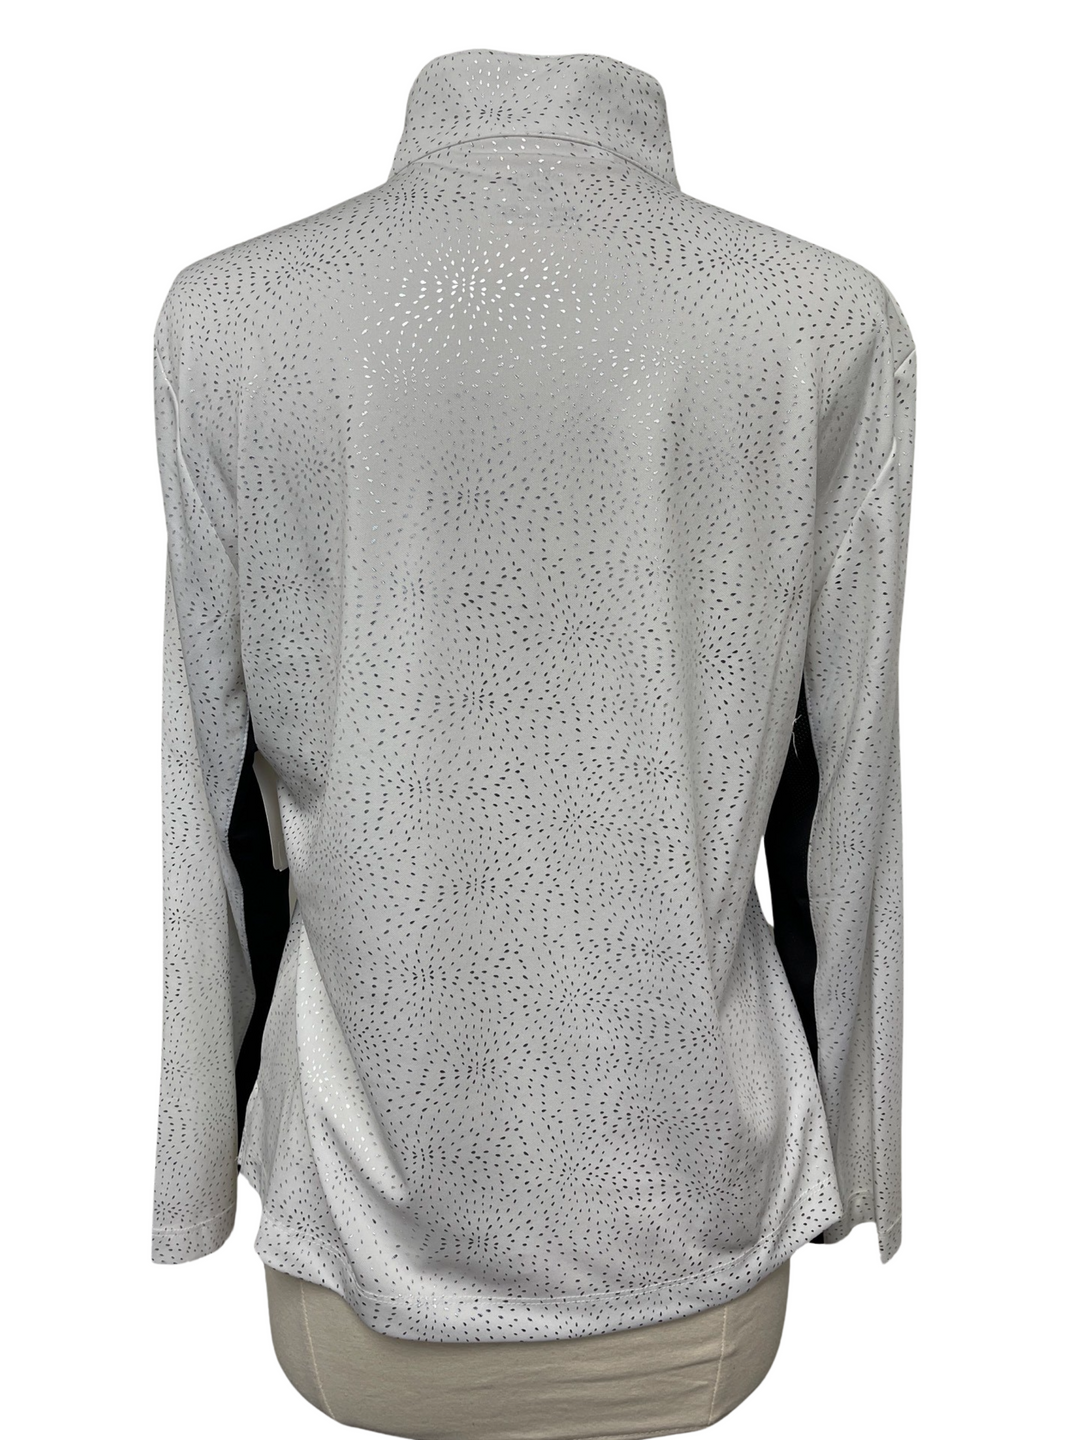 Monterey Club Long Sleeve Top - White/Silver - Size Large - Skorzie